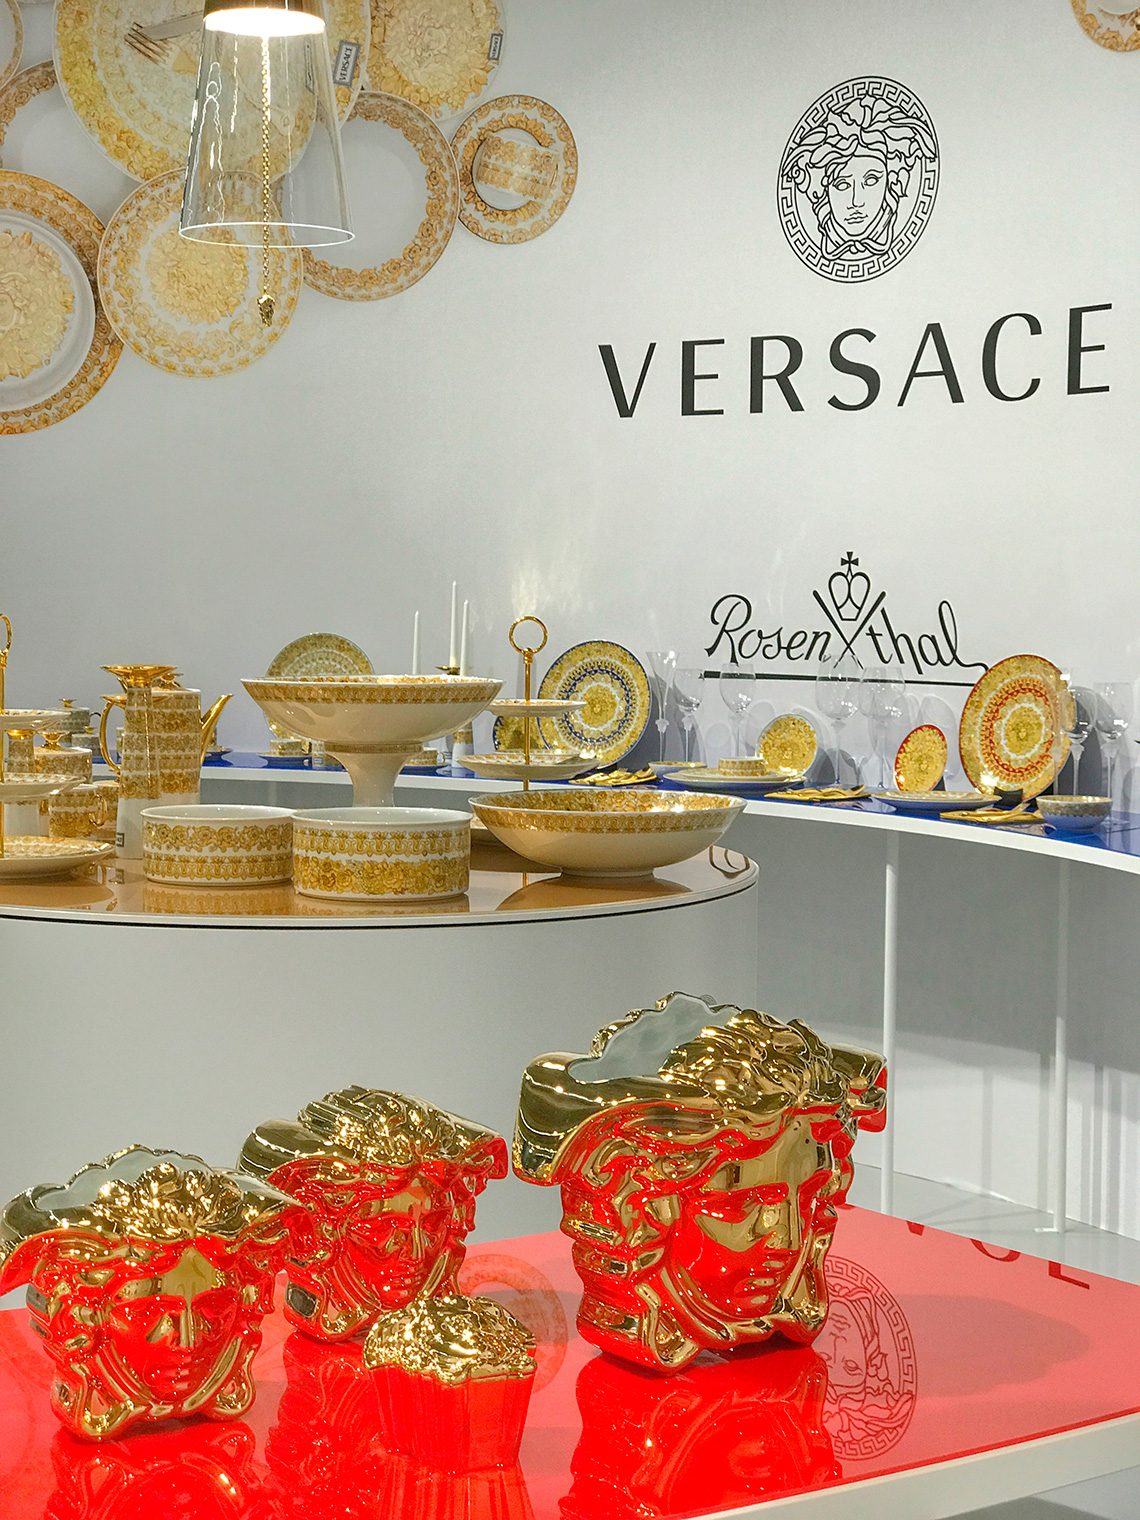 Exquisite tableware from Versace at the Ambiente fair in Frankfurt